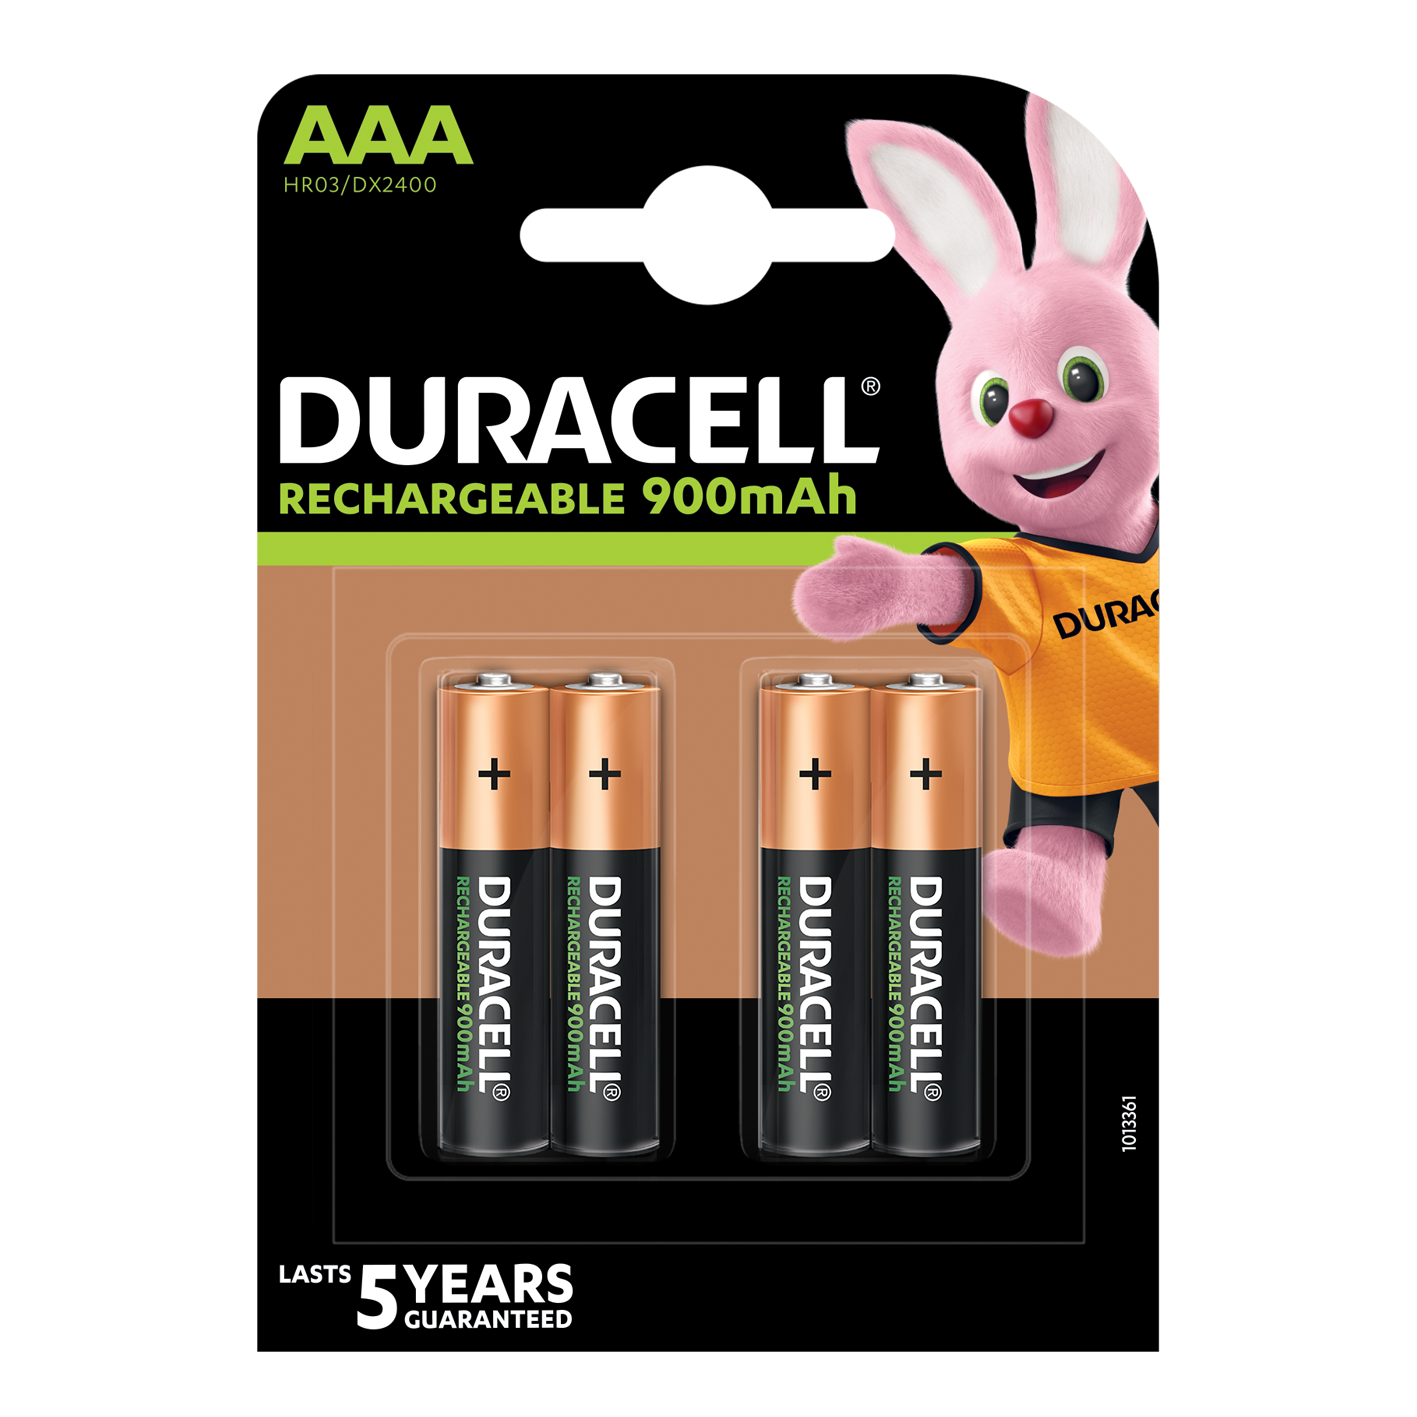 Duracell AAA 900mAh Recharge, Pack of 4